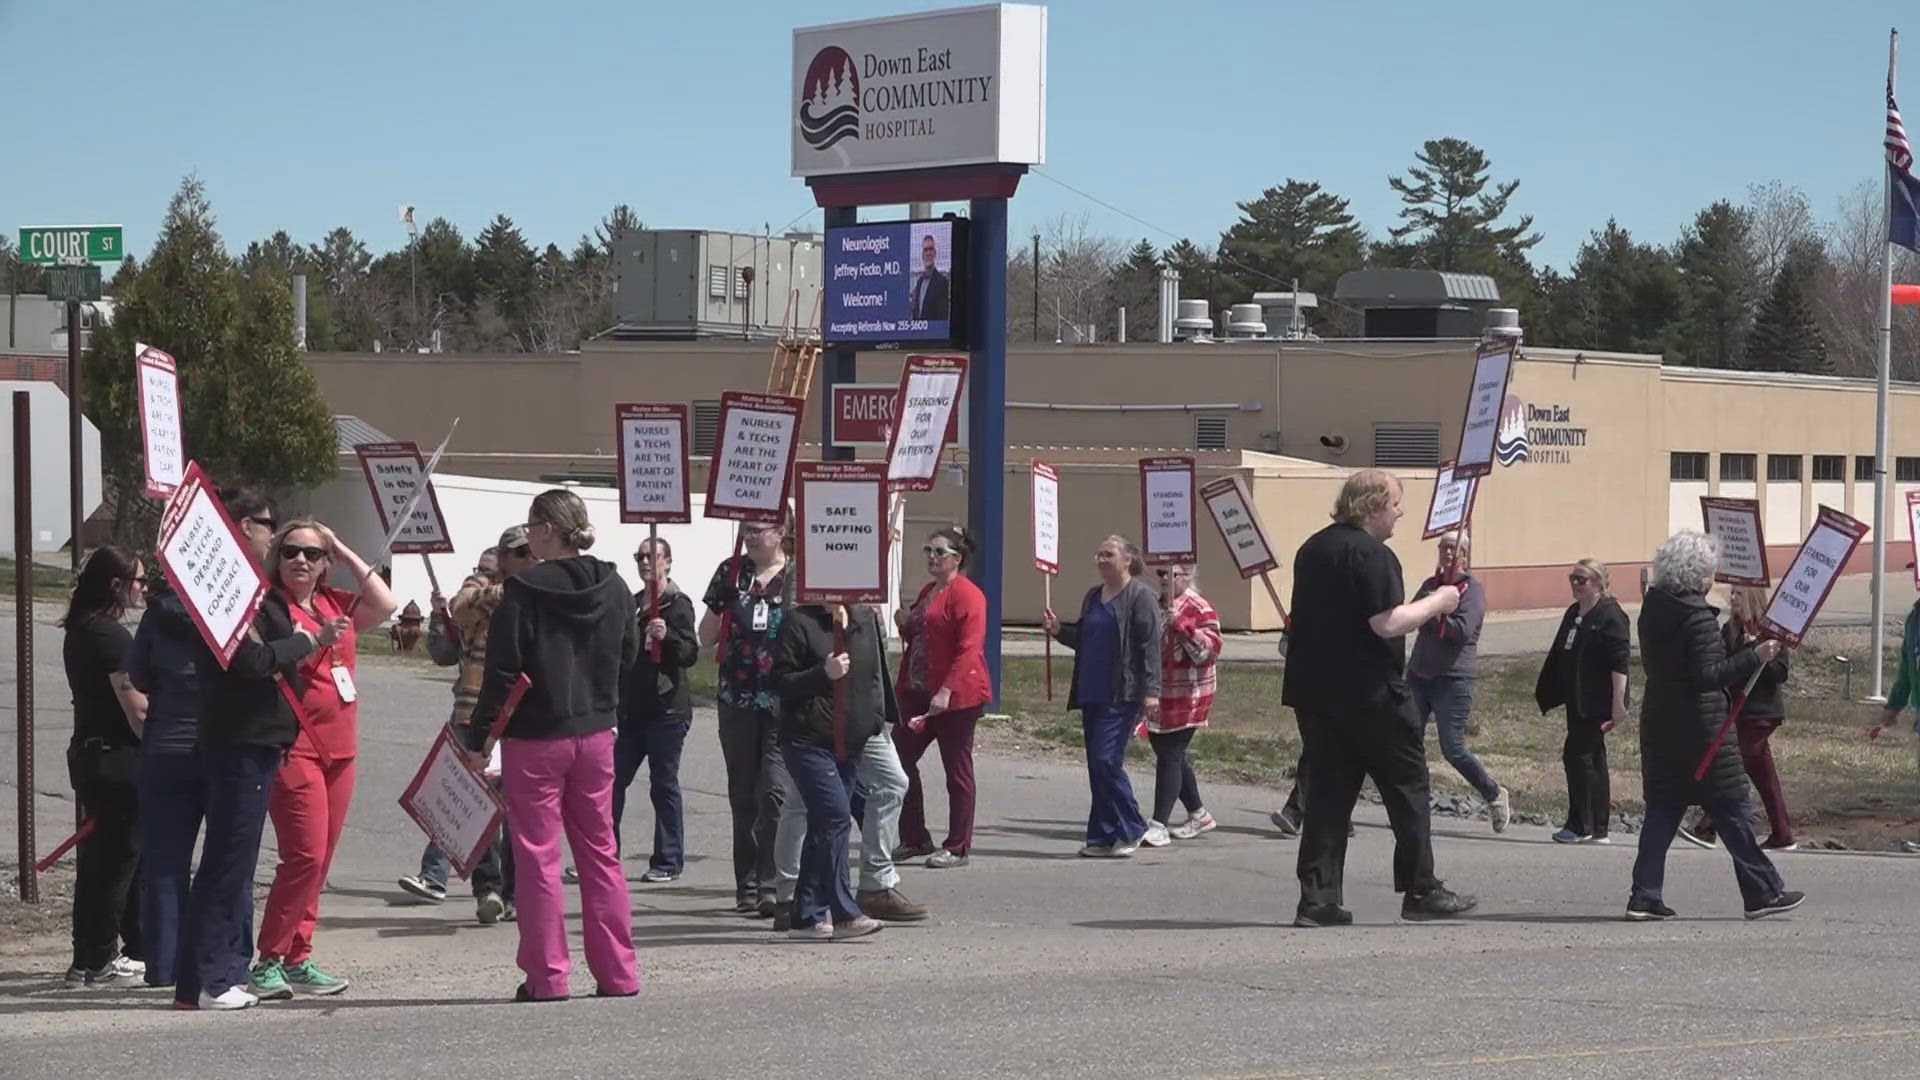 Employees represented by the union Maine State Nurses Association are demanding a 15 percent wage increase for all union jobs spread over the next three years.